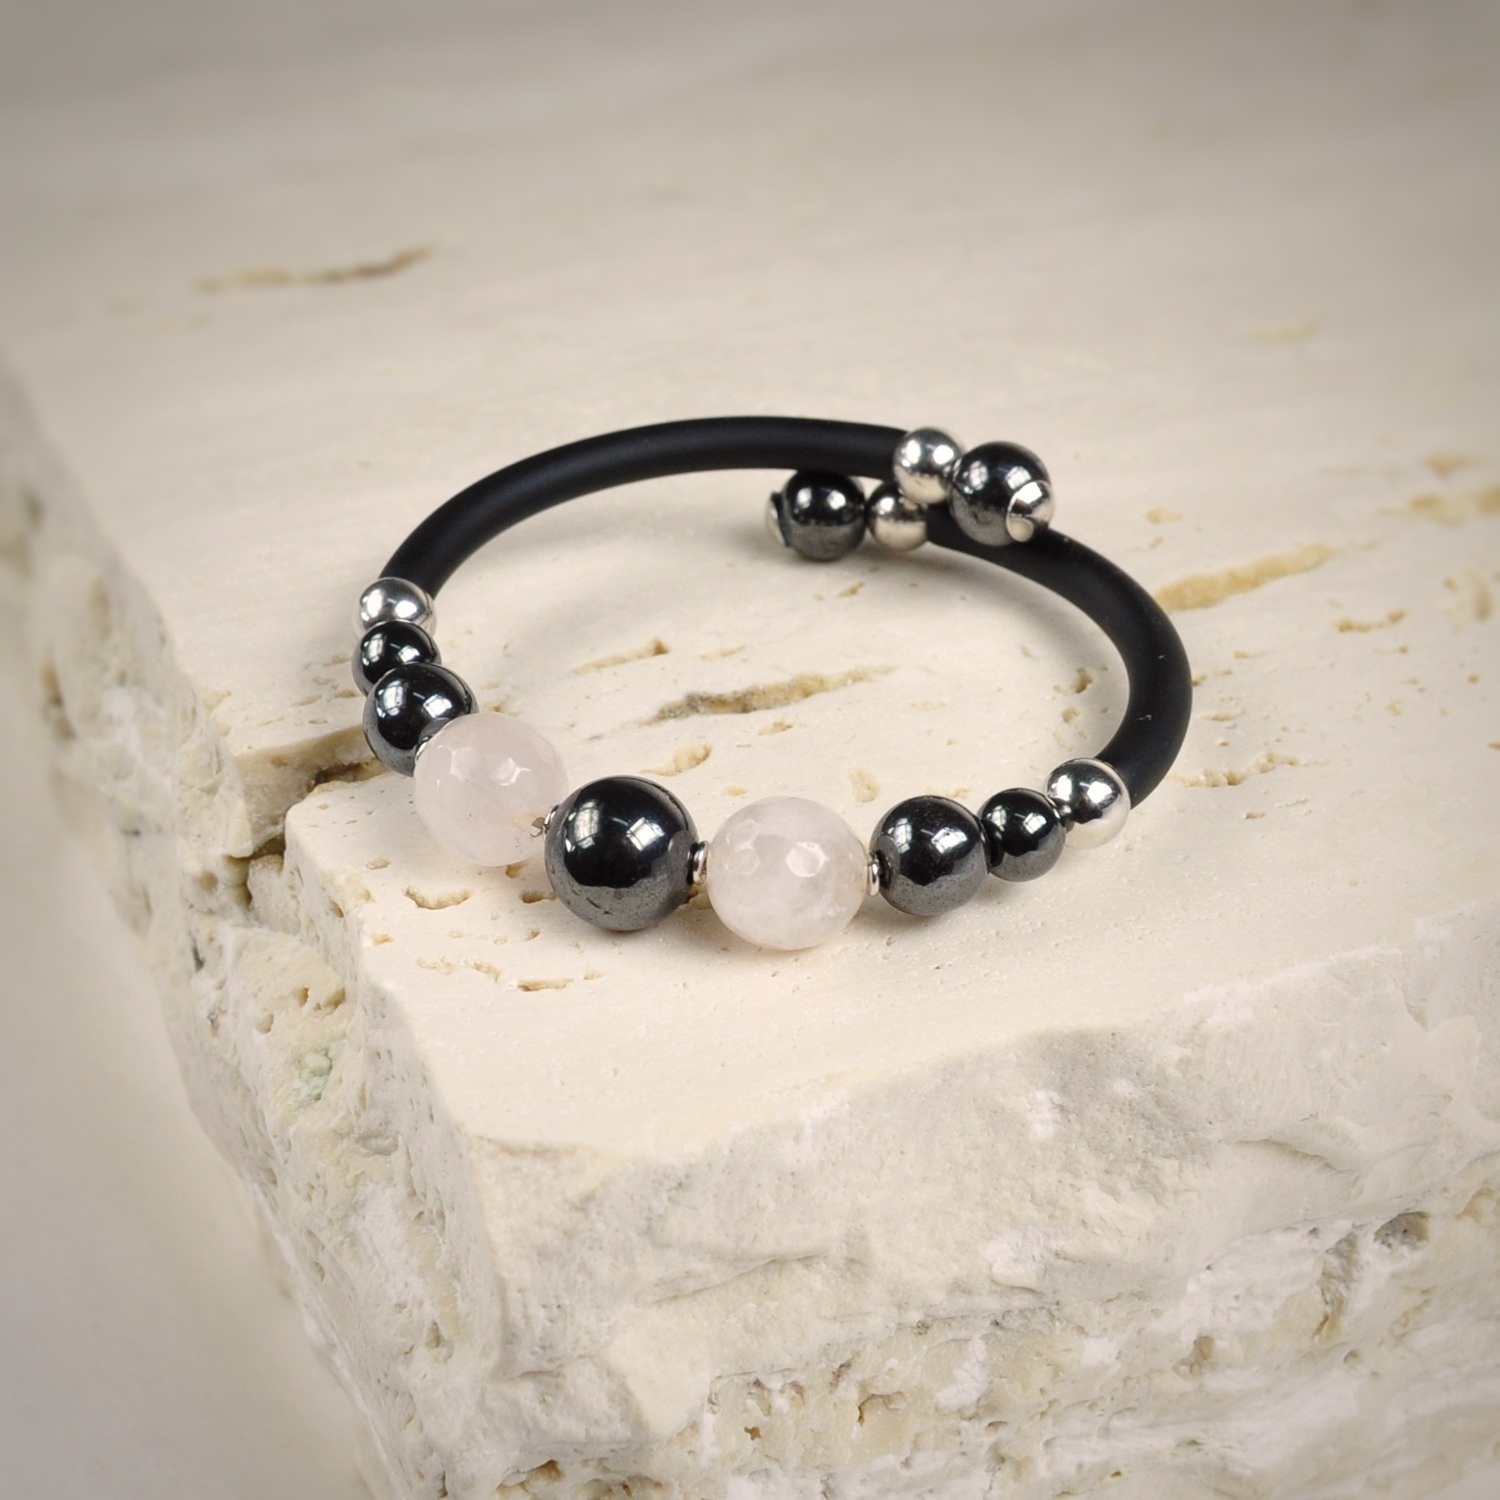 Vitality Rubber Bracelet with Hematite Stones and faceted Rose Quartz 1